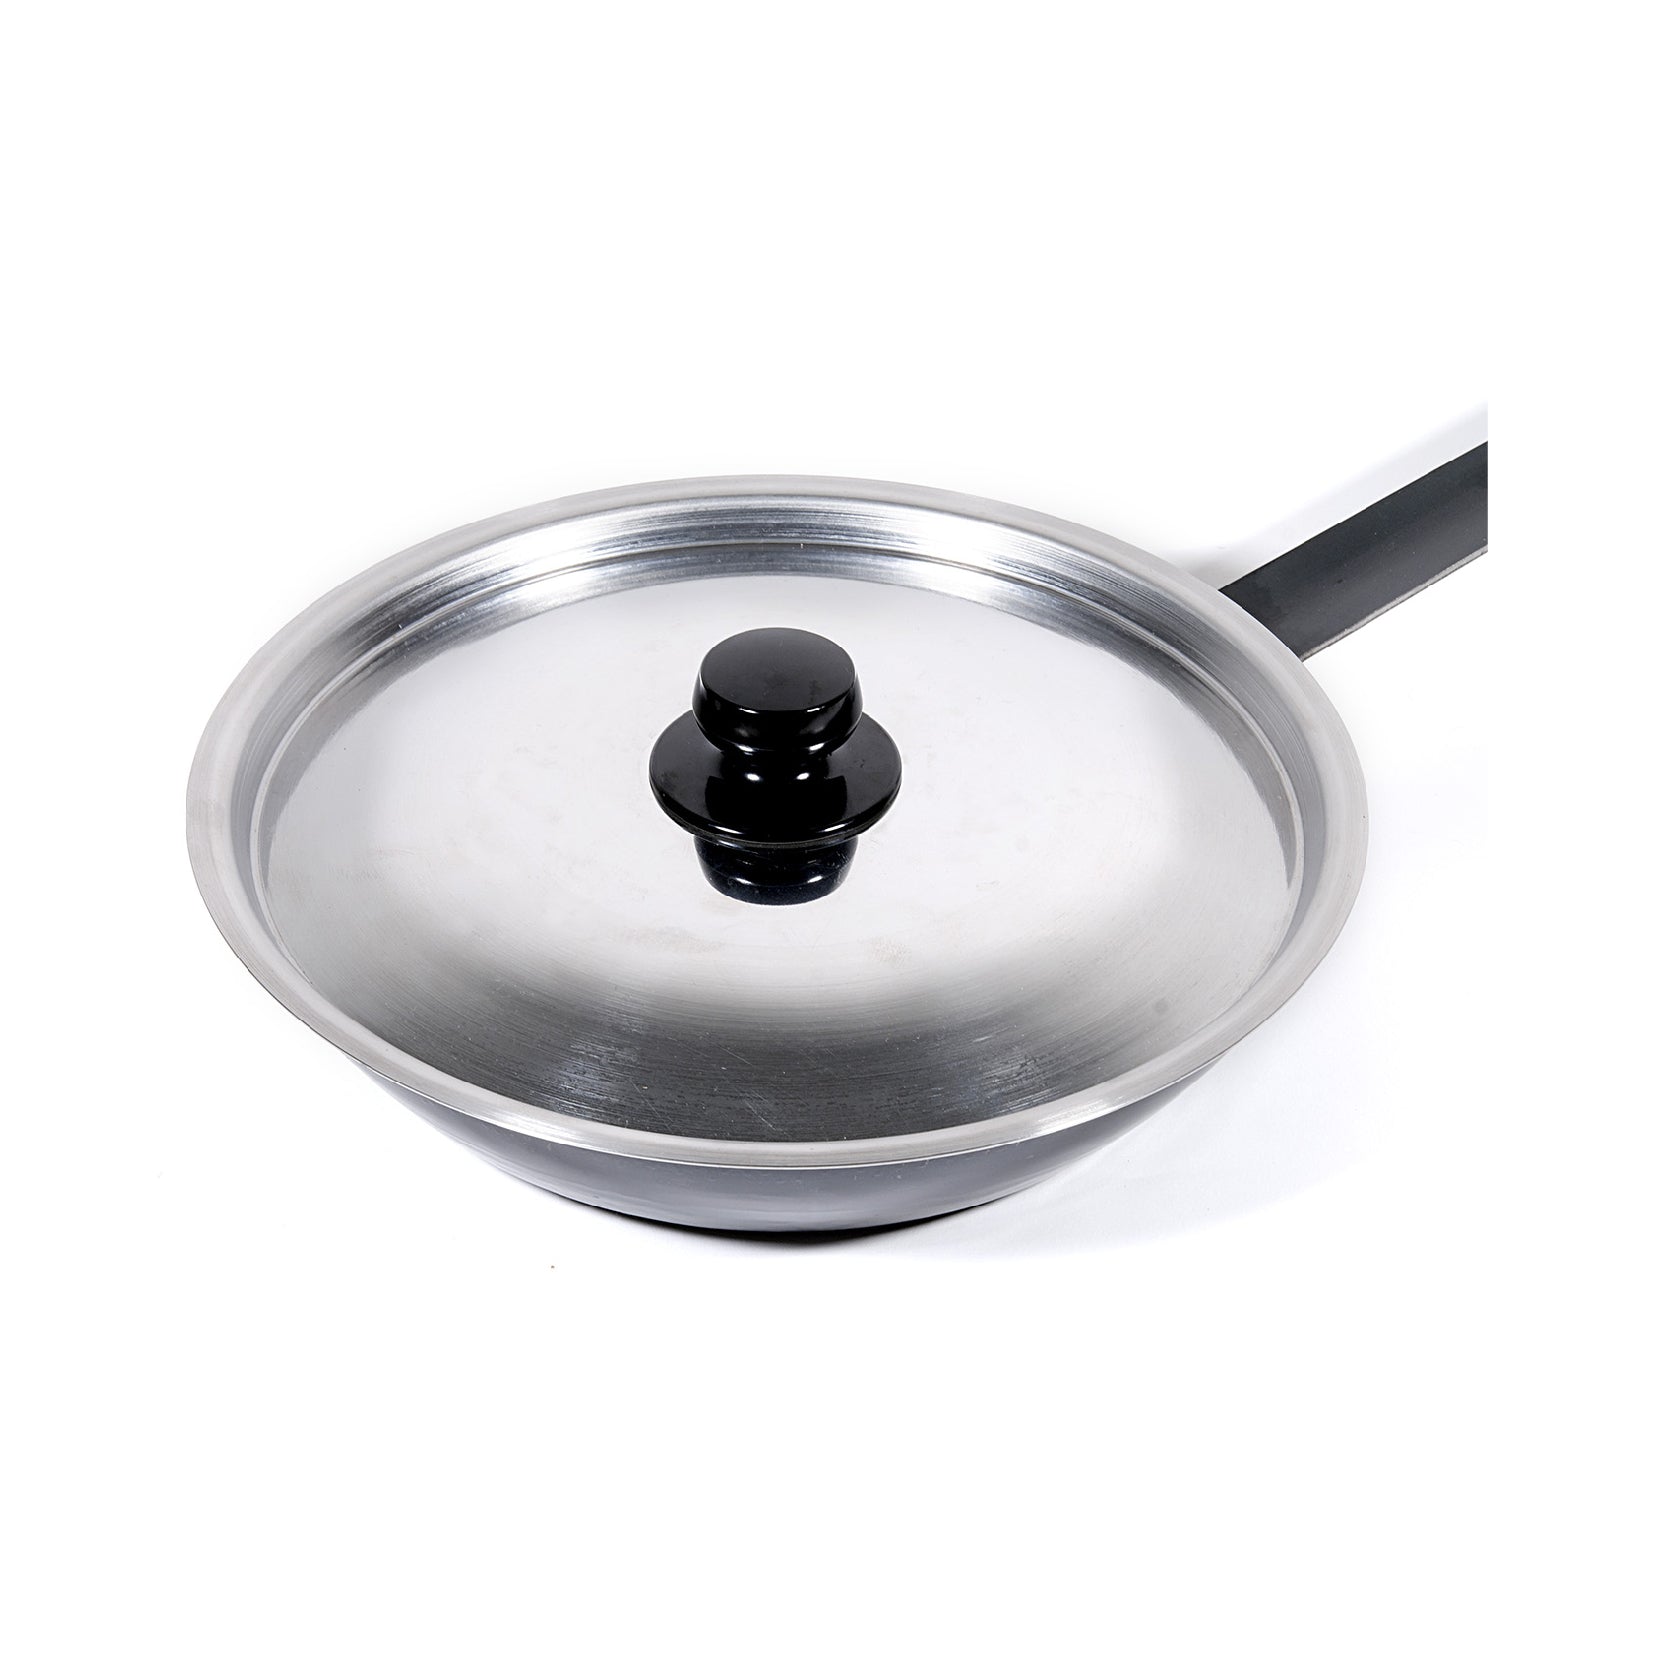 Lid for KAMA-ASA's Hammered Iron Frying pan 26cm